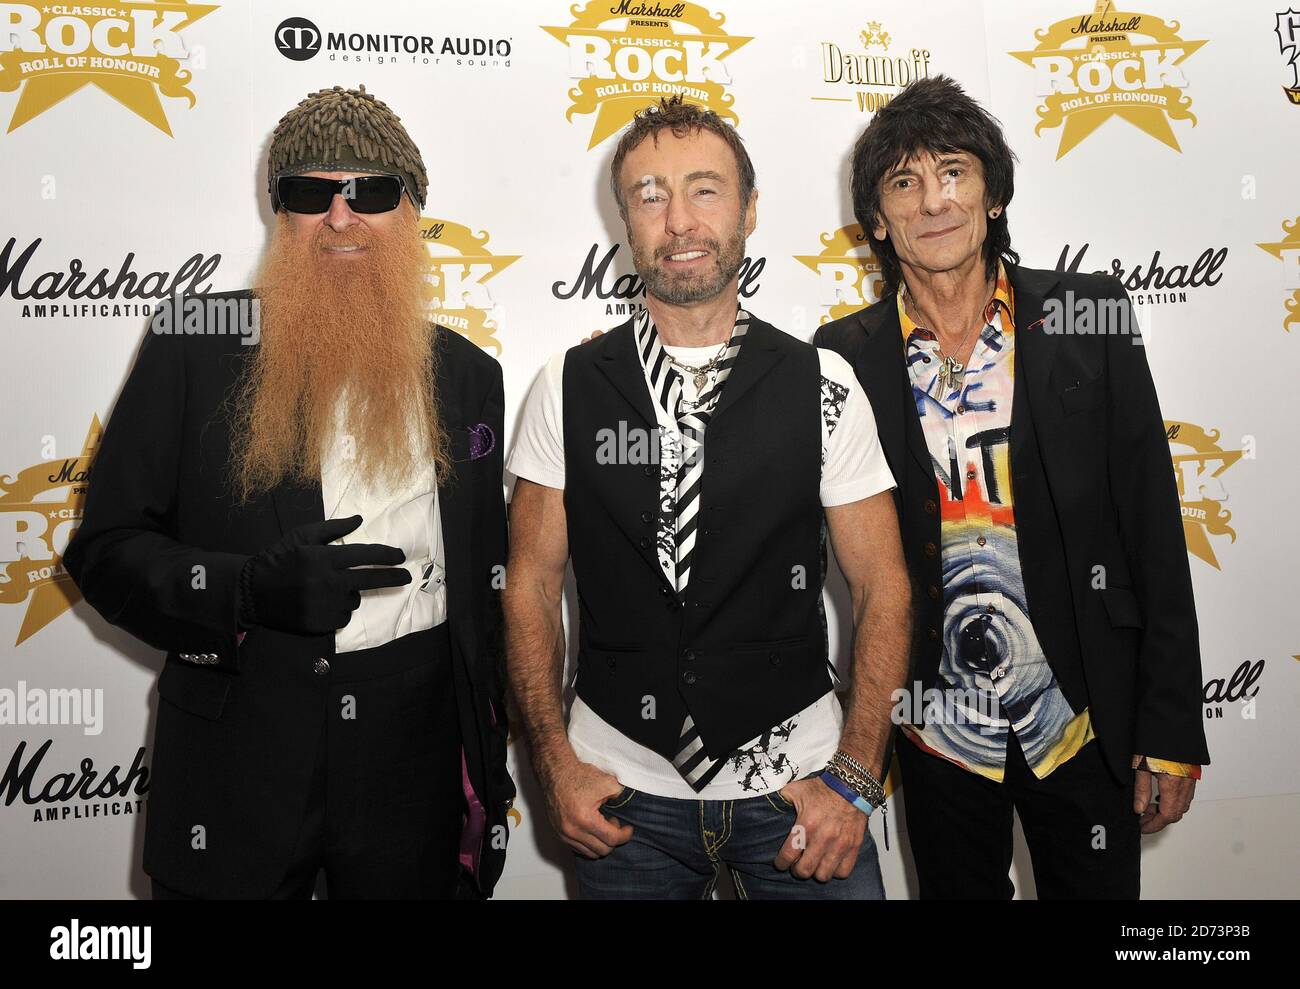 (l-r) Billy Gibbons, Paul Rodgers and Ronnie Wood arrive at the Classic Rock Roll of Honour Awards 2009 held at the Park Lane Hotel in central London. Stock Photo